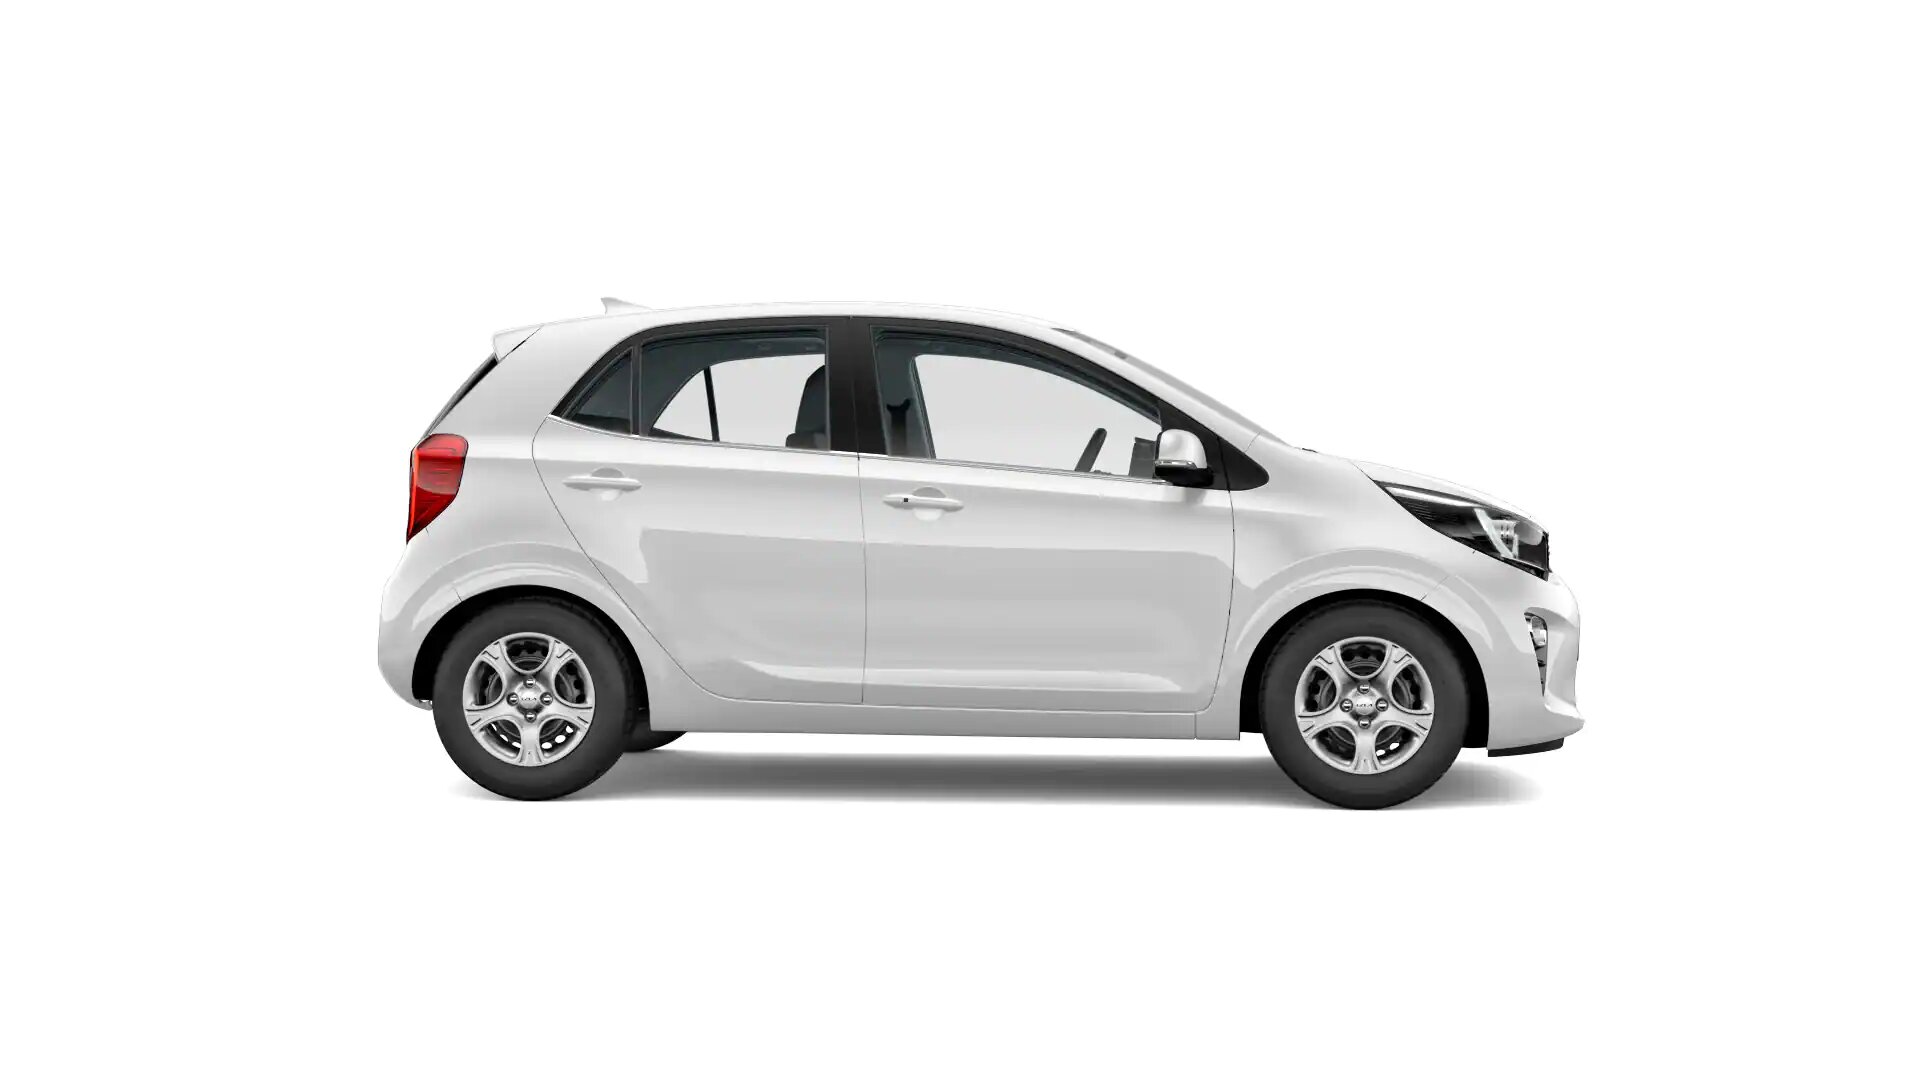 Renting Kia Picanto Concept Compacto Blanco Clear White Manual Renting Finders